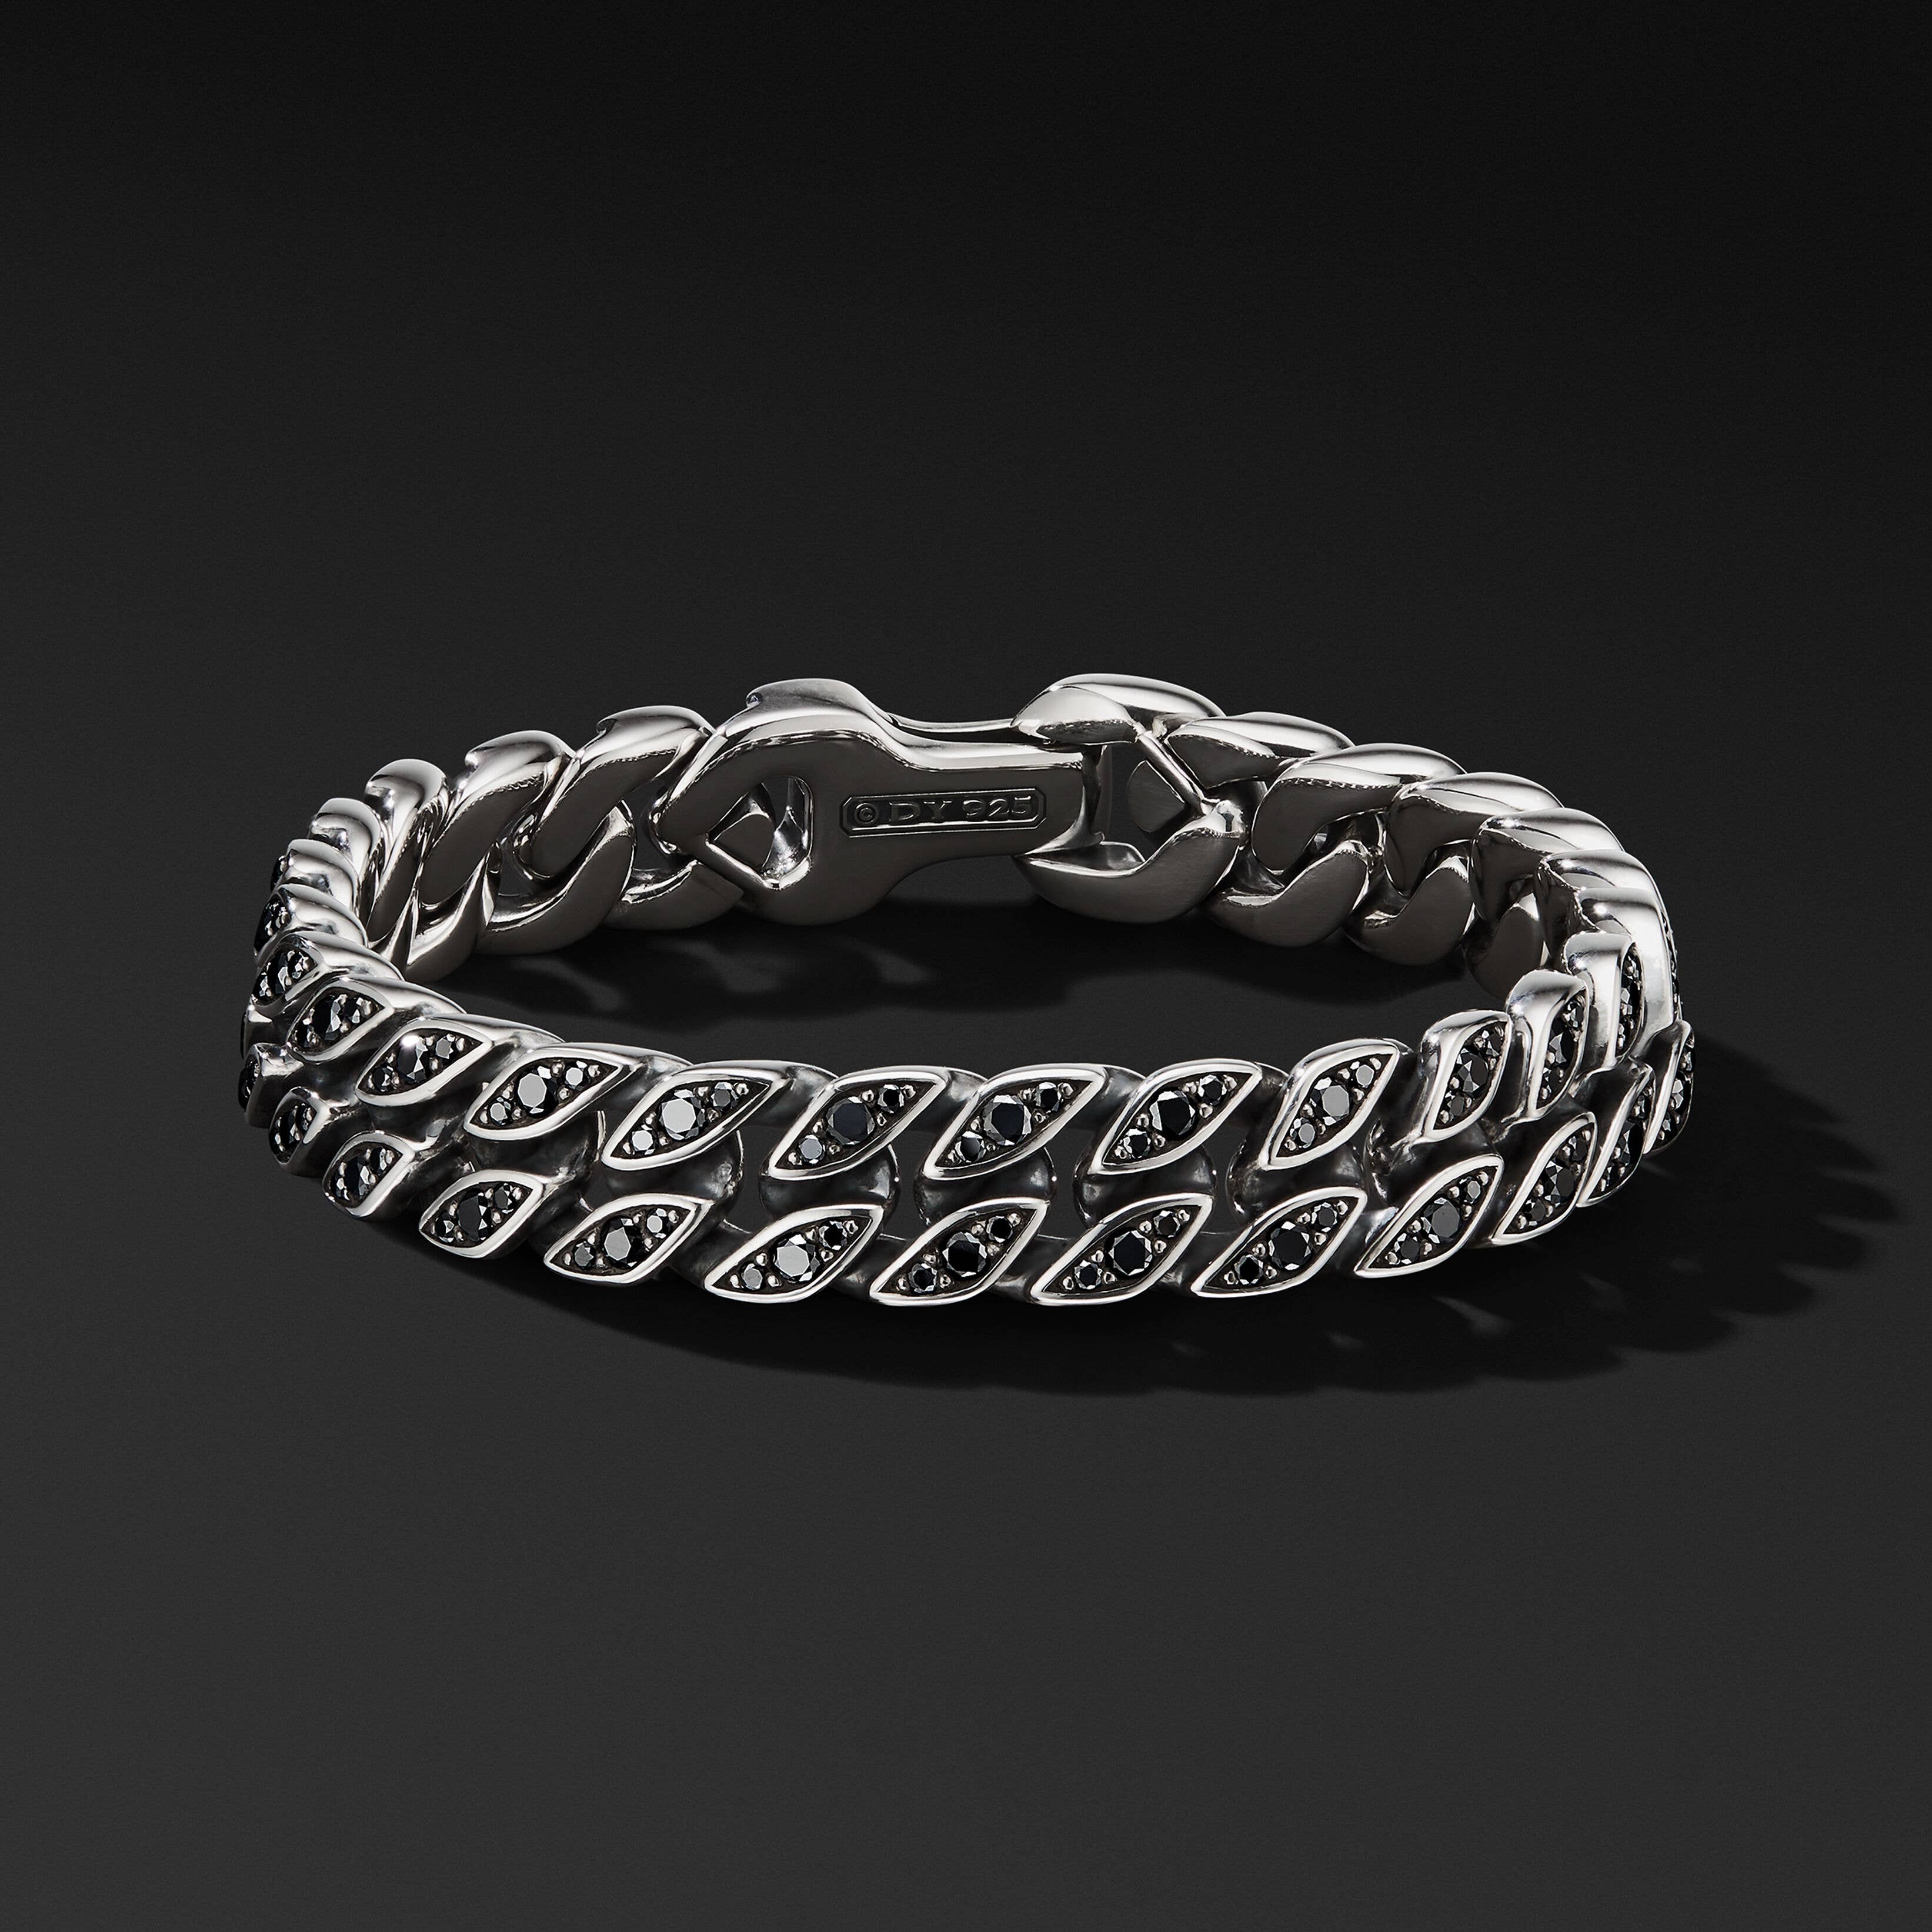 Curb Chain Bracelet in Sterling Silver with Pavé Black Diamonds